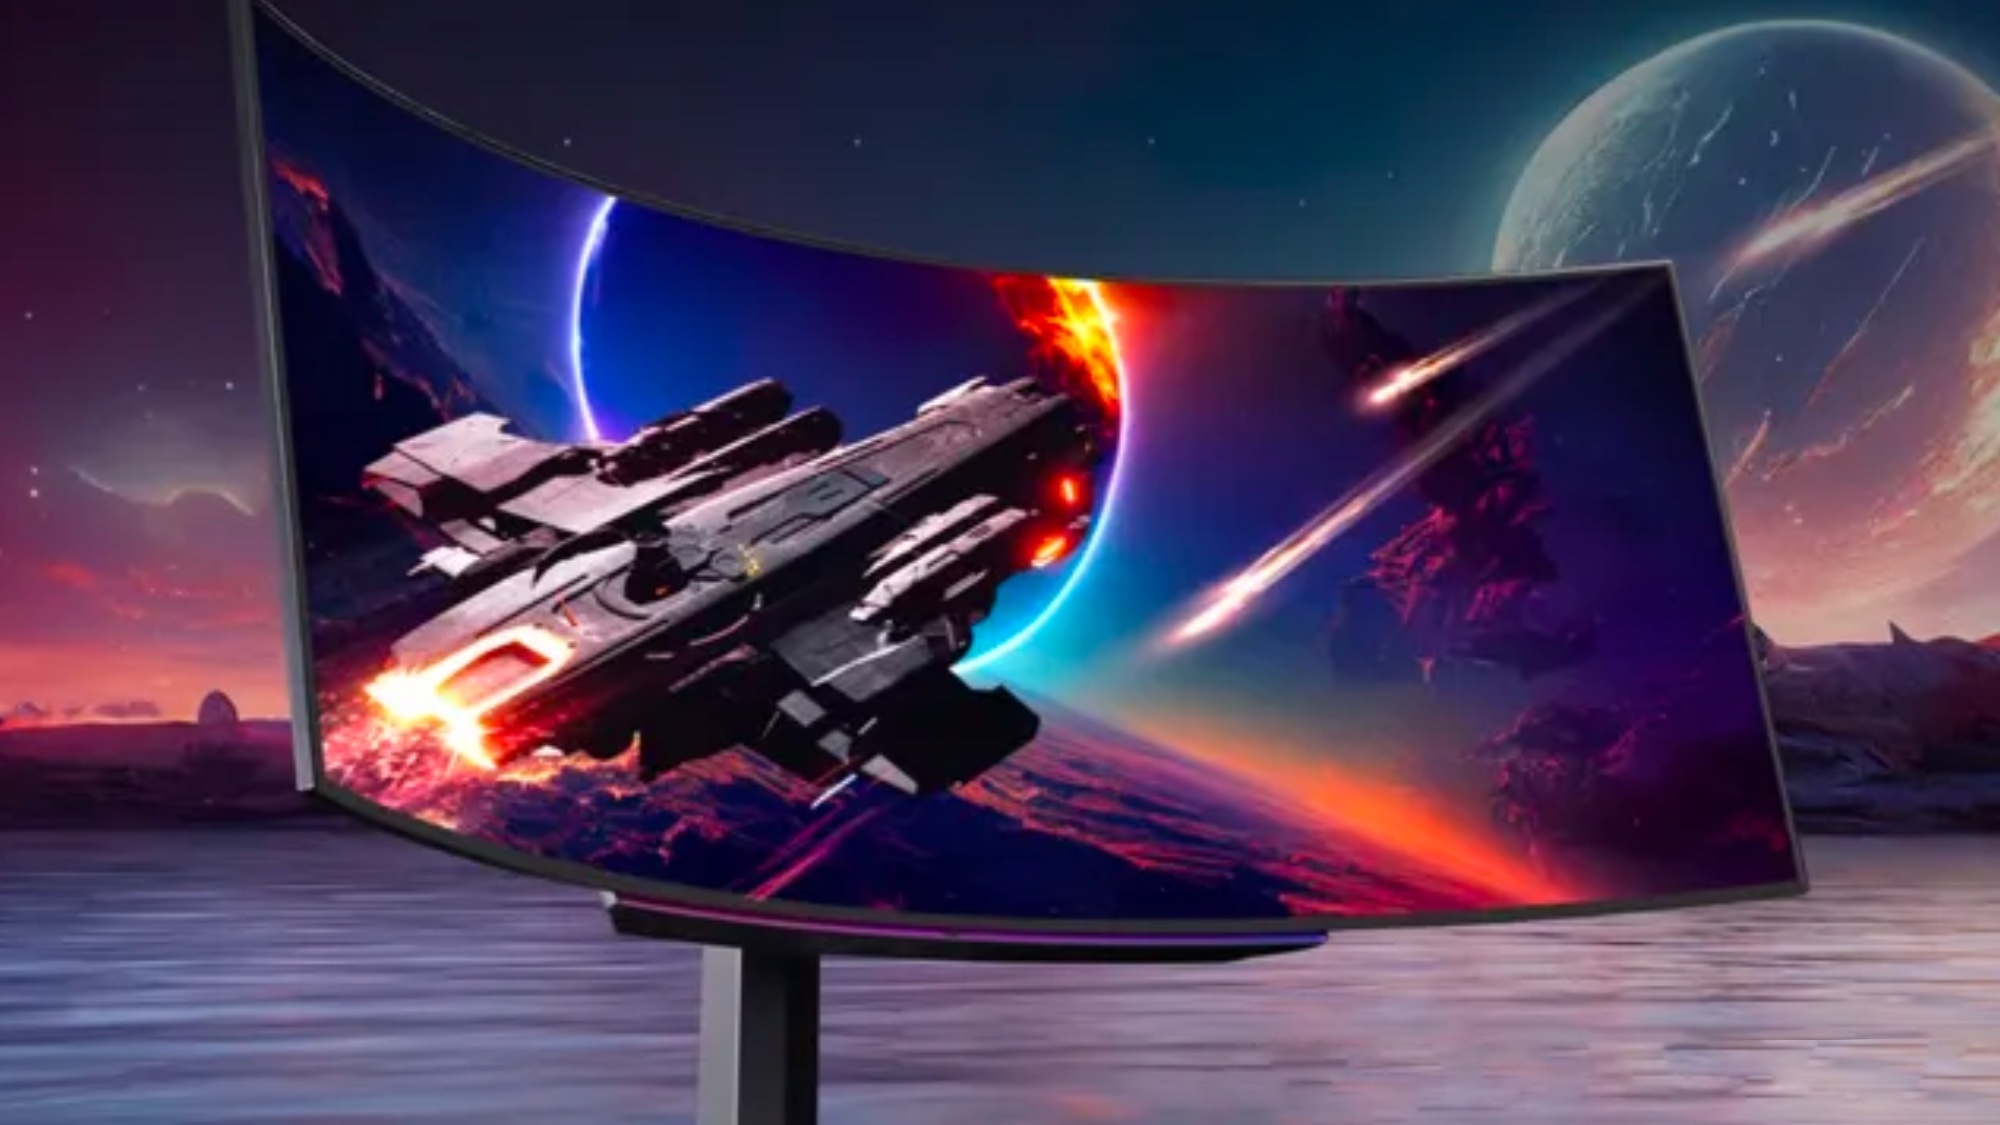 LG just made the fastest OLED gaming display yet - The Verge